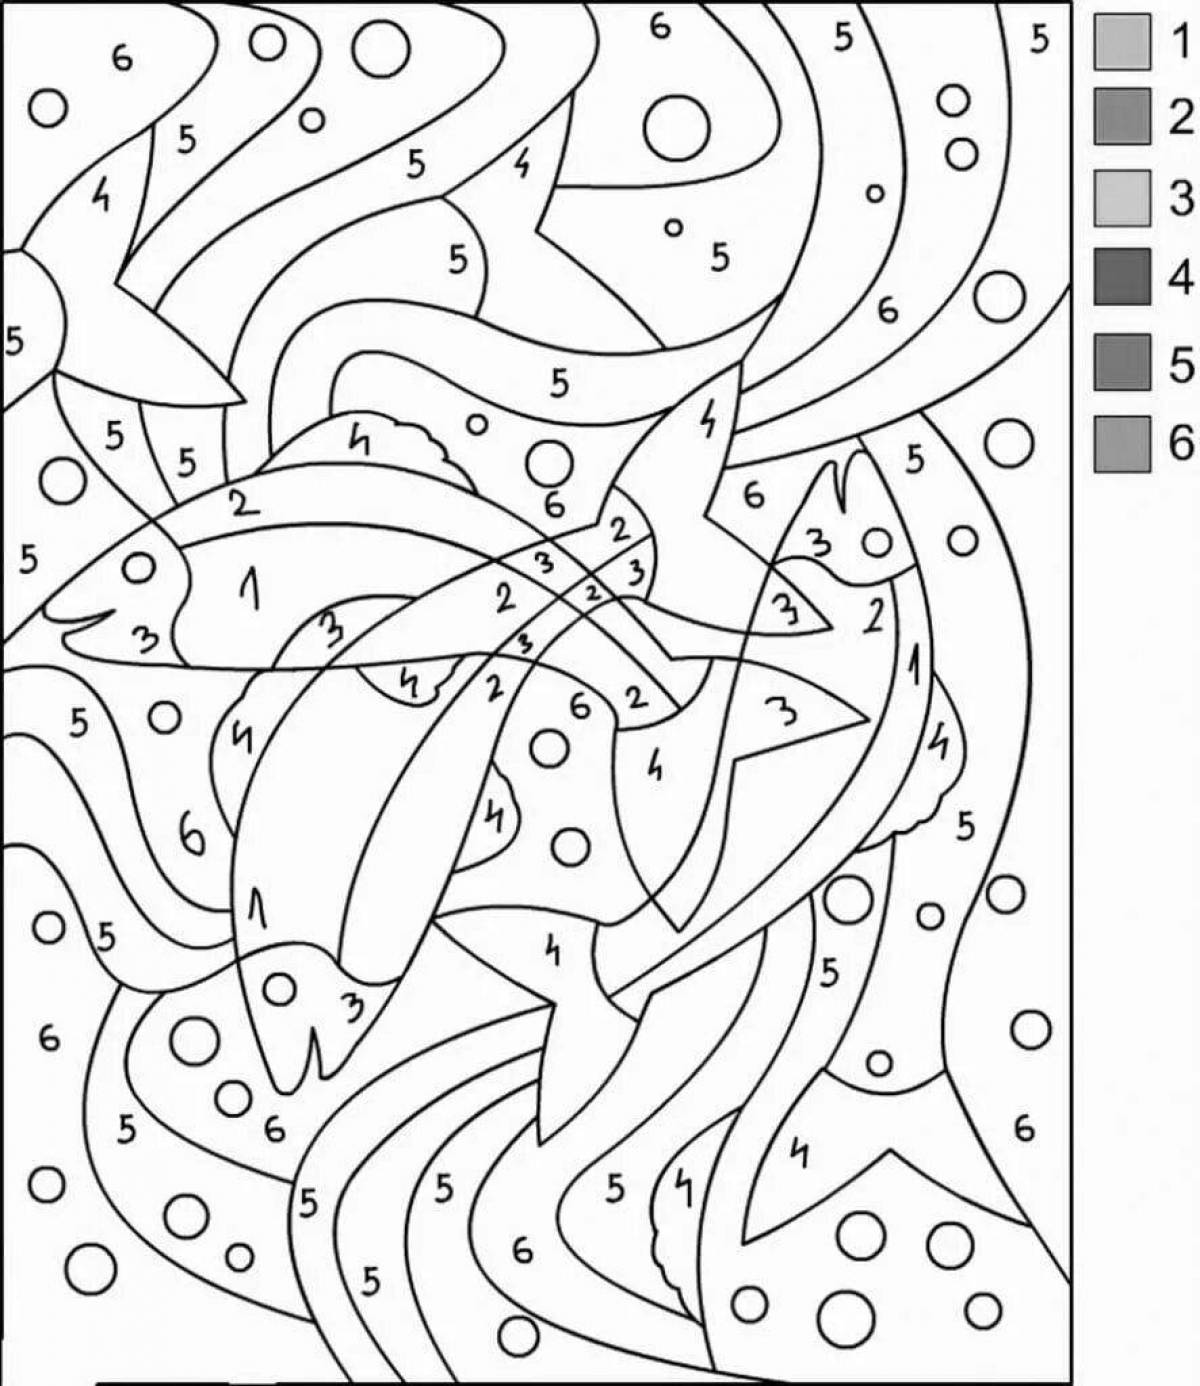 All by number coloring pages